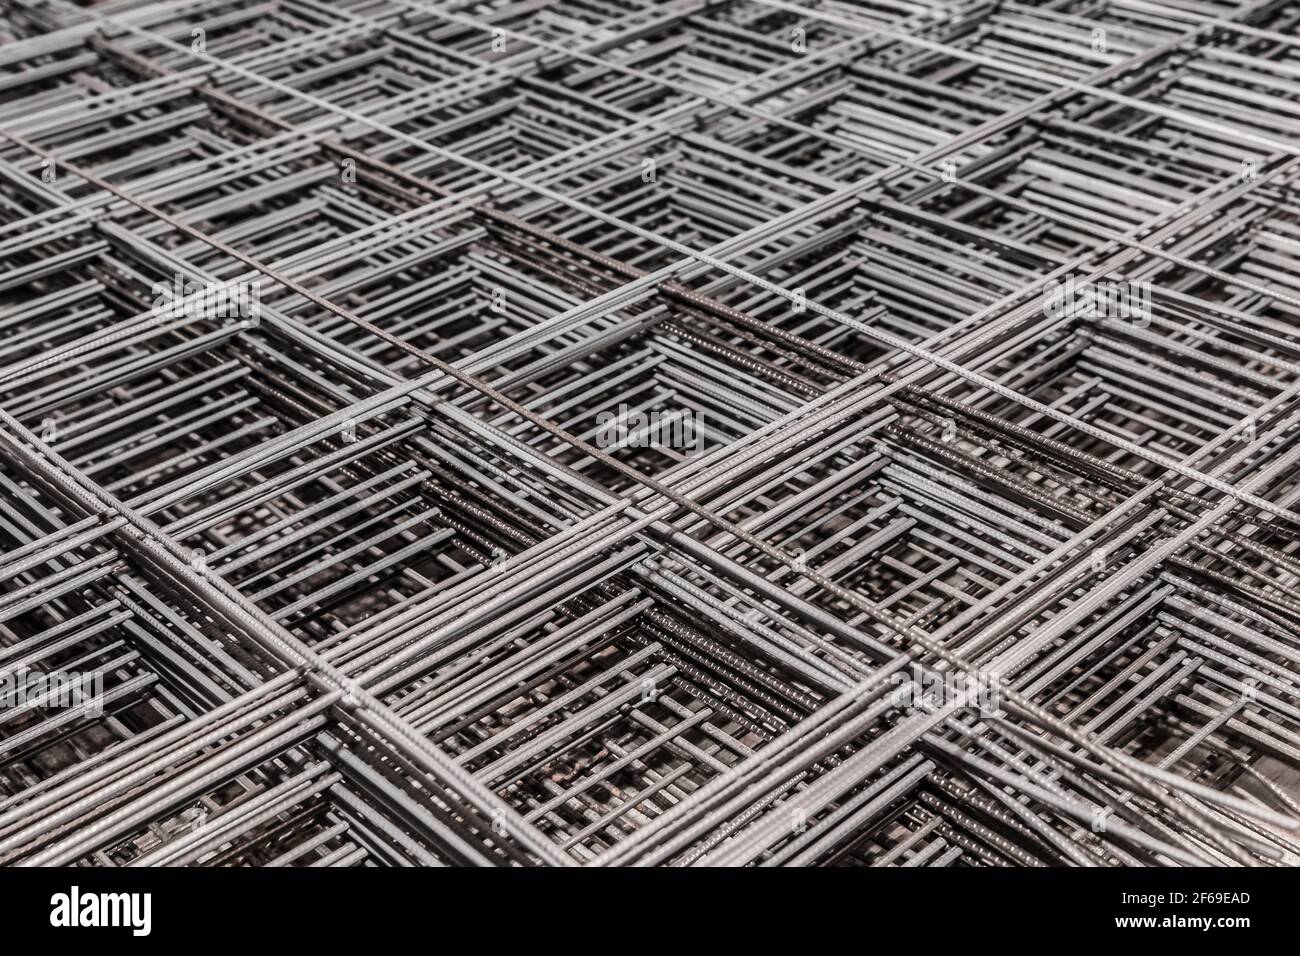 Metal bars background in diagonal lines close-up, industrial mesh of steel wire texture, building material. Stock Photo